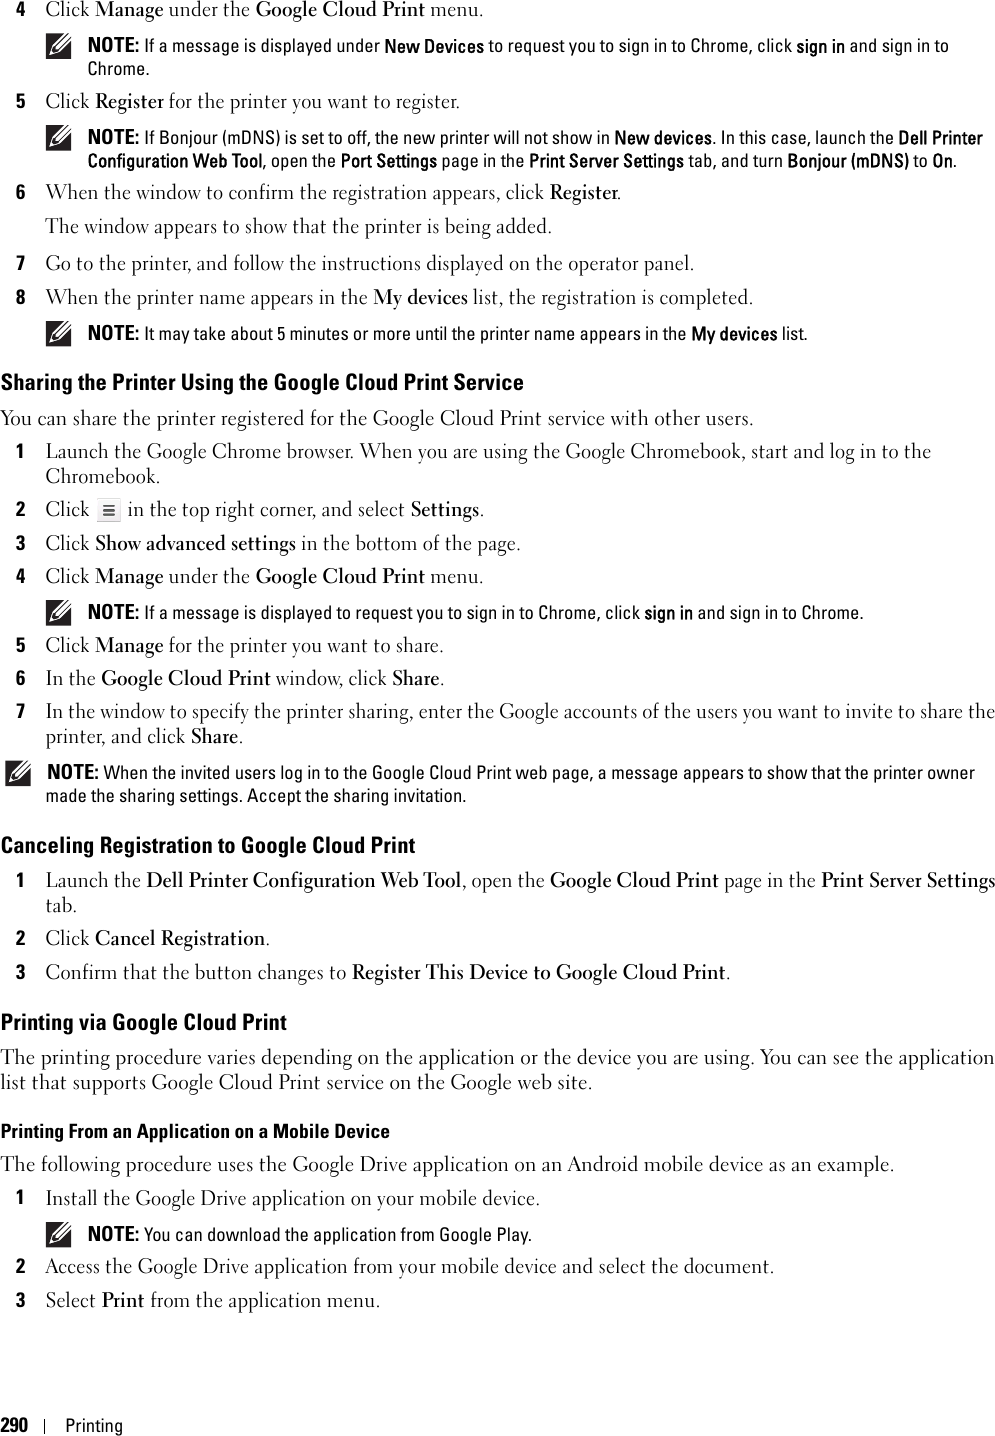 290Printing4Click Manage under the Google Cloud Print menu. NOTE: If a message is displayed under New Devices to request you to sign in to Chrome, click sign in and sign in to Chrome.5Click Register for the printer you want to register. NOTE: If Bonjour (mDNS) is set to off, the new printer will not show in New devices. In this case, launch the Dell Printer Configuration Web Tool, open the Port Settings page in the Print Server Settings tab, and turn Bonjour (mDNS) to On.6When the window to confirm the registration appears, click Register.The window appears to show that the printer is being added.7Go to the printer, and follow the instructions displayed on the operator panel.8When the printer name appears in the My devices list, the registration is completed. NOTE: It may take about 5 minutes or more until the printer name appears in the My devices list.Sharing the Printer Using the Google Cloud Print ServiceYou can share the printer registered for the Google Cloud Print service with other users.1Launch the Google Chrome browser. When you are using the Google Chromebook, start and log in to the Chromebook.2Click   in the top right corner, and select Settings.3Click Show advanced settings in the bottom of the page.4Click Manage under the Google Cloud Print menu. NOTE: If a message is displayed to request you to sign in to Chrome, click sign in and sign in to Chrome.5Click Manage for the printer you want to share.6In the Google Cloud Print window, click Share.7In the window to specify the printer sharing, enter the Google accounts of the users you want to invite to share the printer, and click Share. NOTE: When the invited users log in to the Google Cloud Print web page, a message appears to show that the printer owner made the sharing settings. Accept the sharing invitation.Canceling Registration to Google Cloud Print1Launch the Dell Printer Configuration Web Tool, open the Google Cloud Print page in the Print Server Settings tab.2Click Cancel Registration.3Confirm that the button changes to Register This Device to Google Cloud Print.Printing via Google Cloud PrintThe printing procedure varies depending on the application or the device you are using. You can see the application list that supports Google Cloud Print service on the Google web site.Printing From an Application on a Mobile DeviceThe following procedure uses the Google Drive application on an Android mobile device as an example.1Install the Google Drive application on your mobile device. NOTE: You can download the application from Google Play.2Access the Google Drive application from your mobile device and select the document.3Select Print from the application menu.